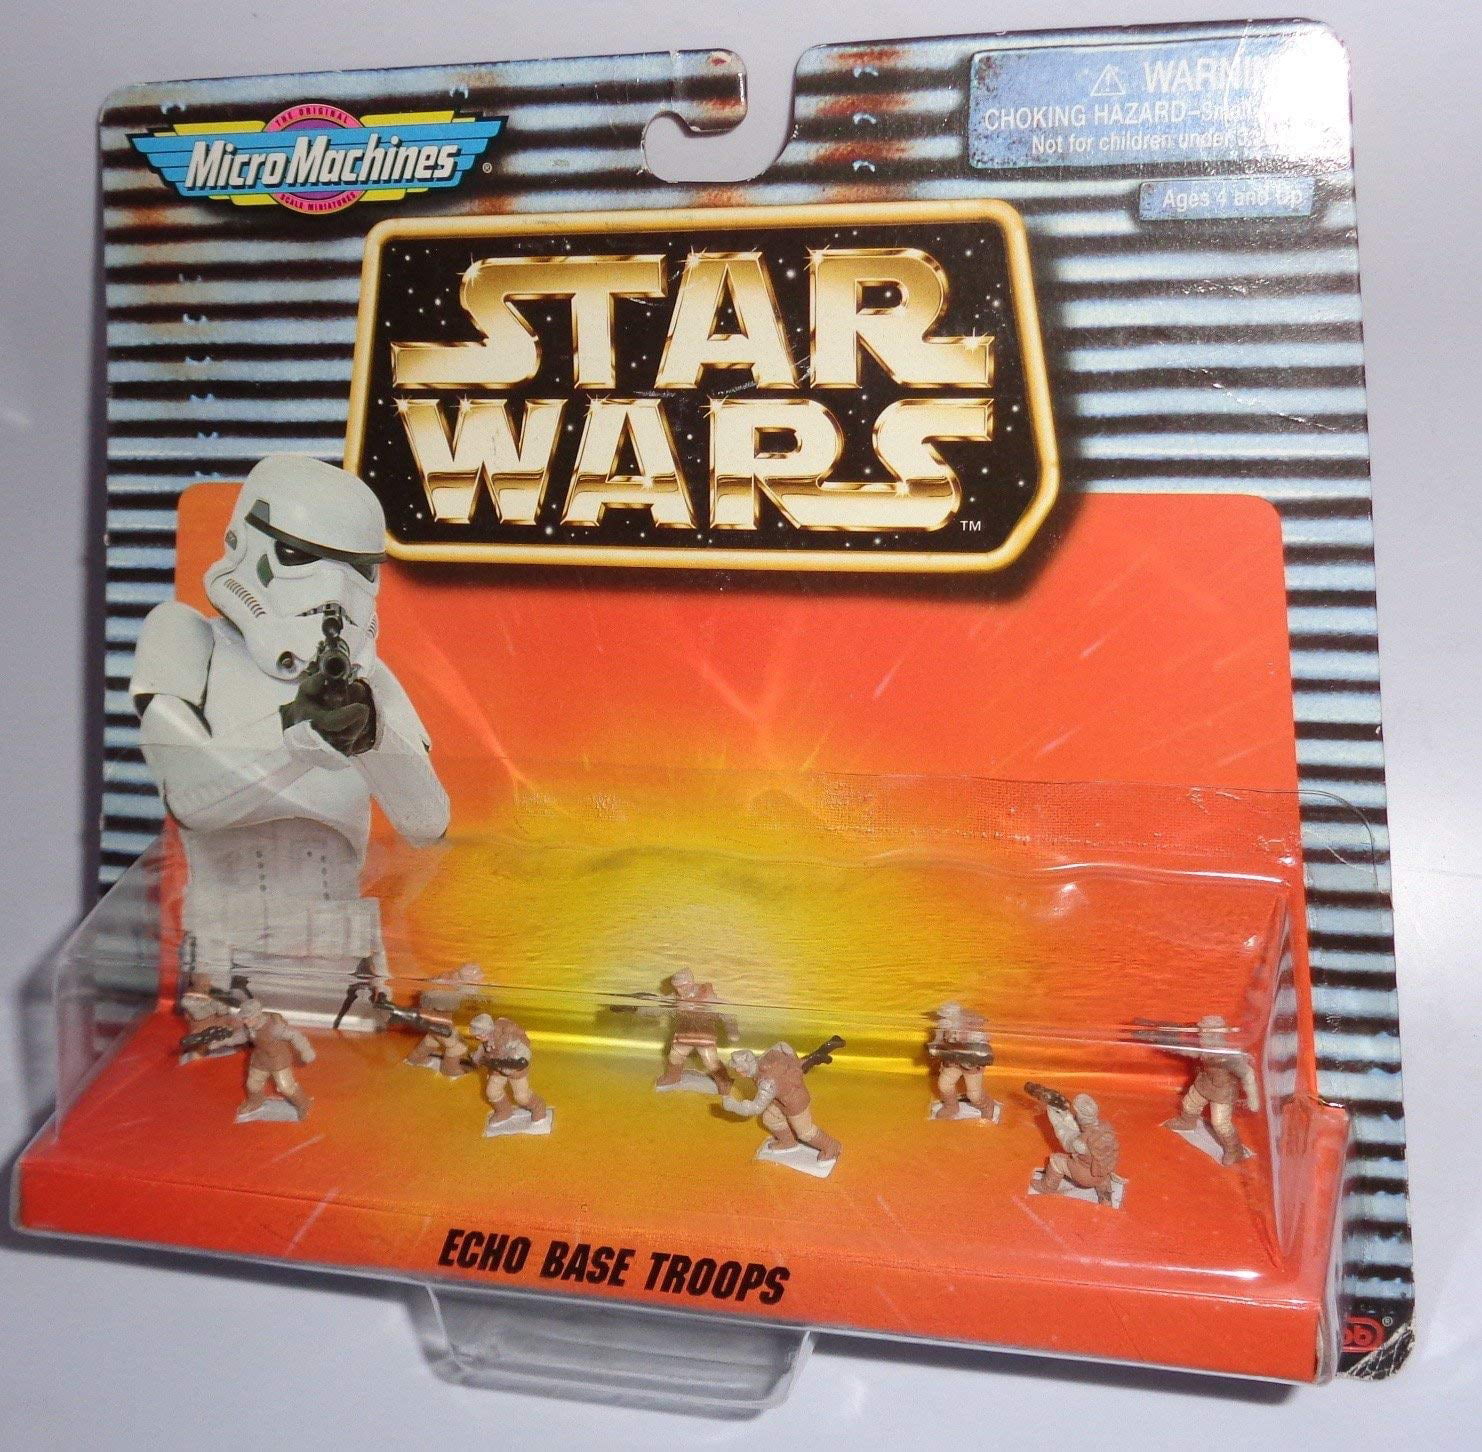 1999 Star Wars Episode I Micro Machines 1" Battle Droids Collection VI Galoob for sale online 